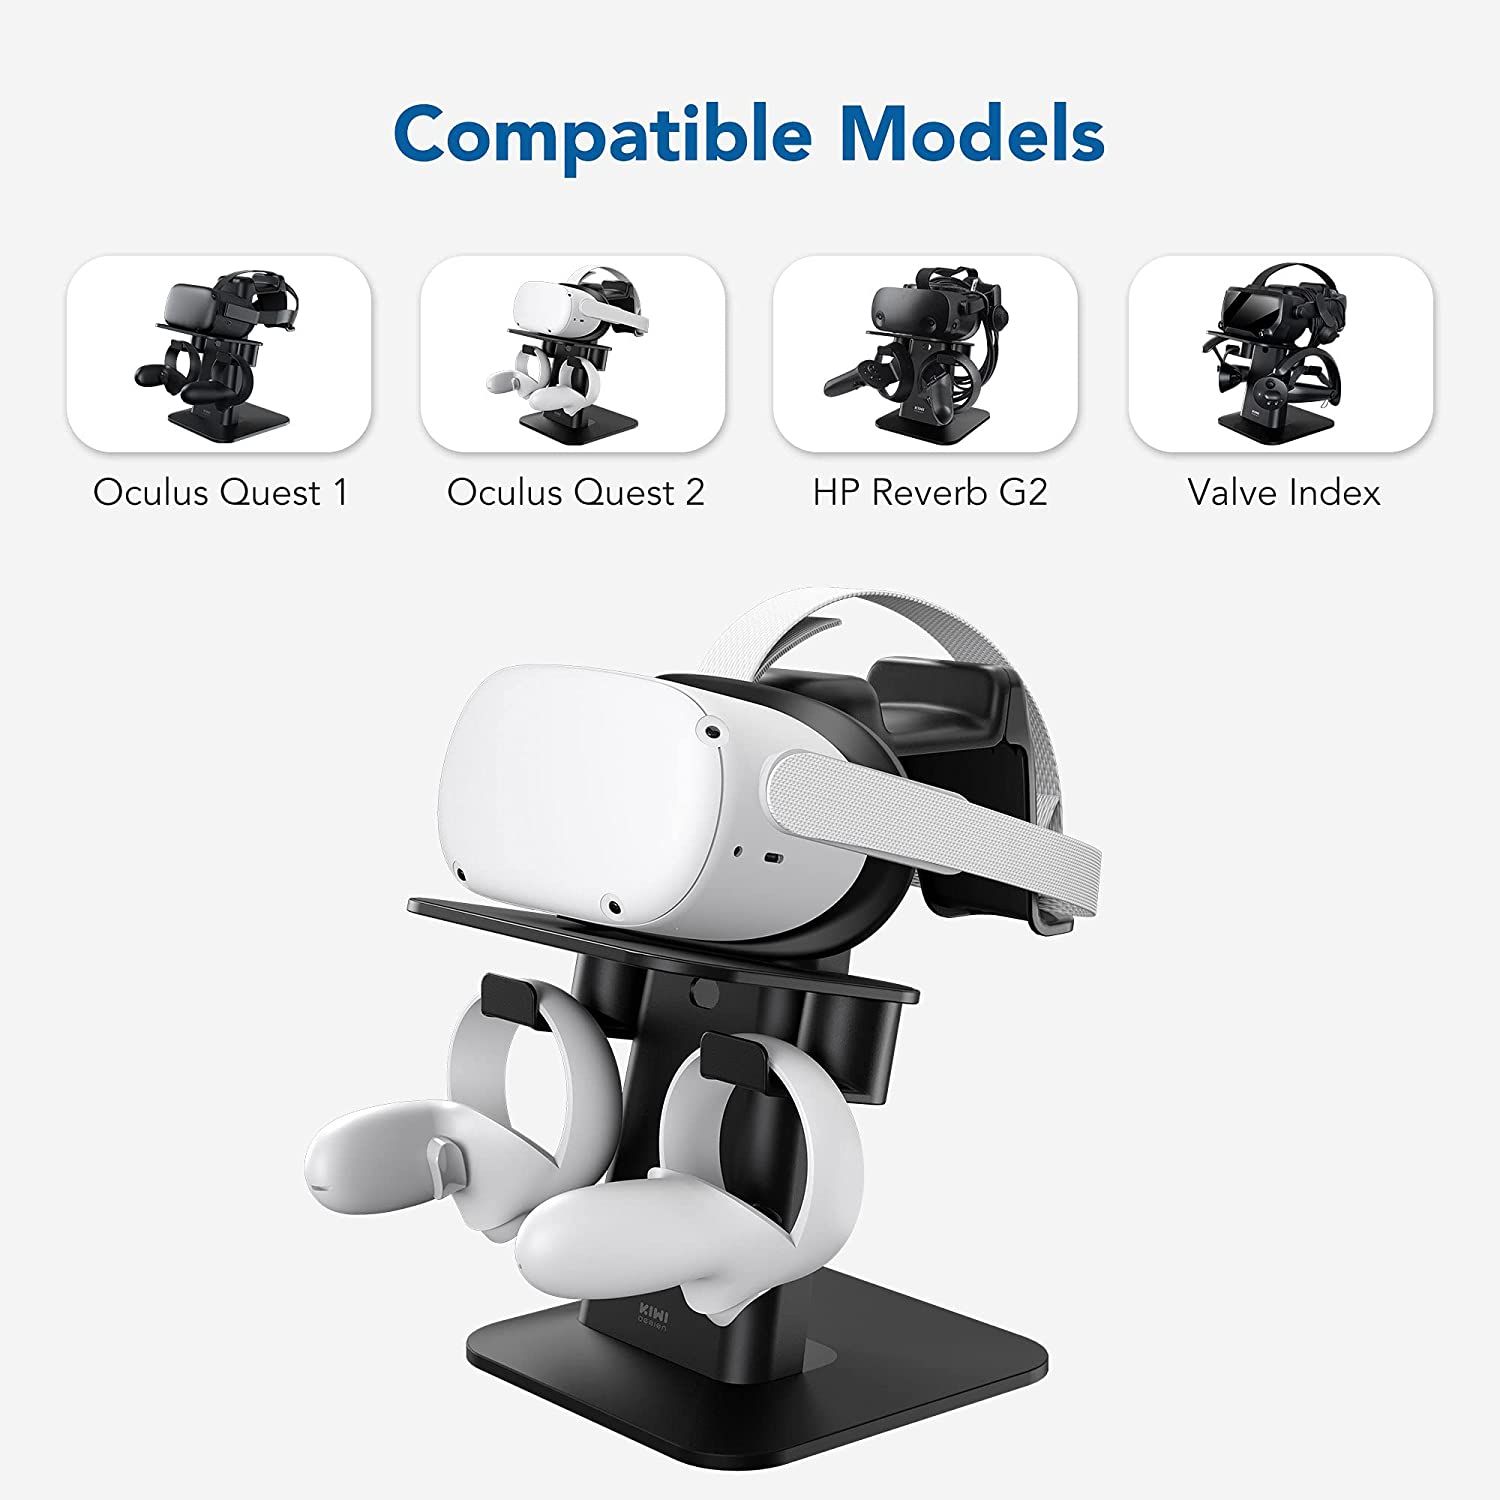 vr display stand showcasing compatible models